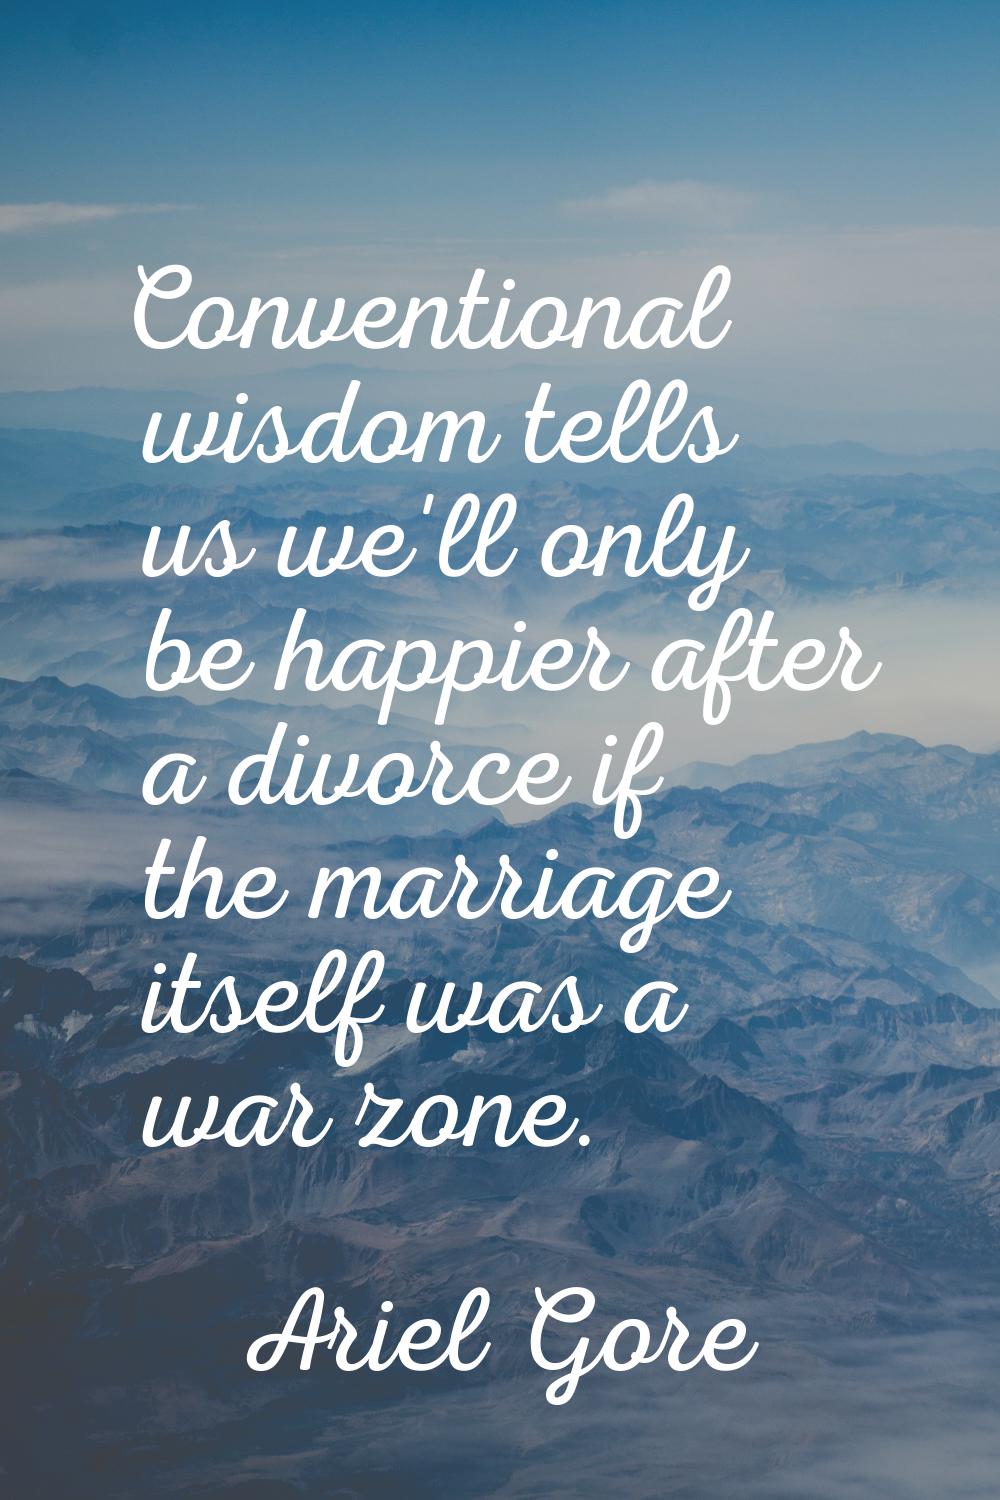 Conventional wisdom tells us we'll only be happier after a divorce if the marriage itself was a war